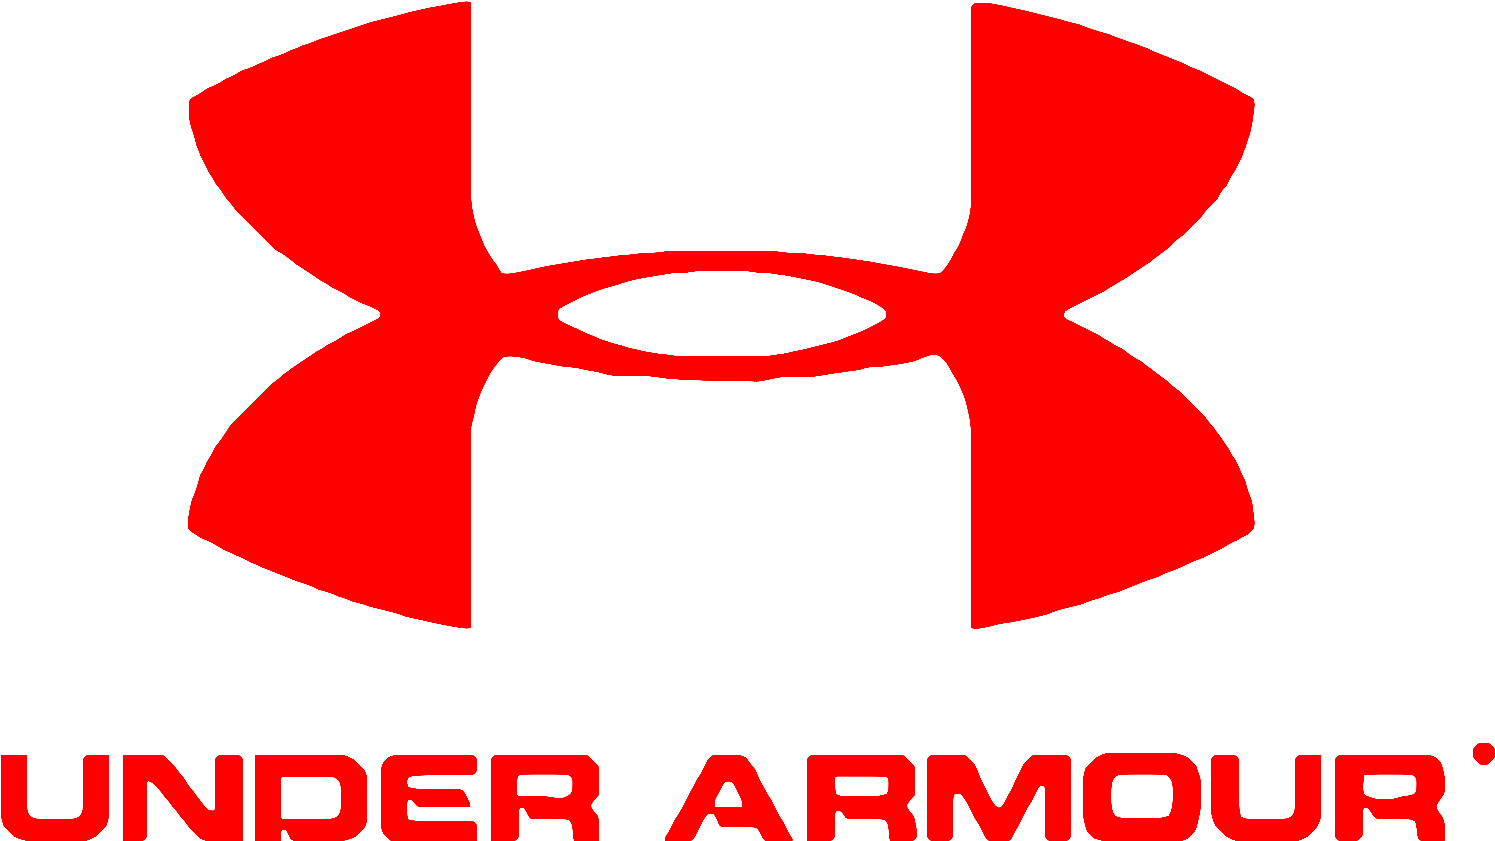 Email - Under Armour Back Logo (1554x1169)